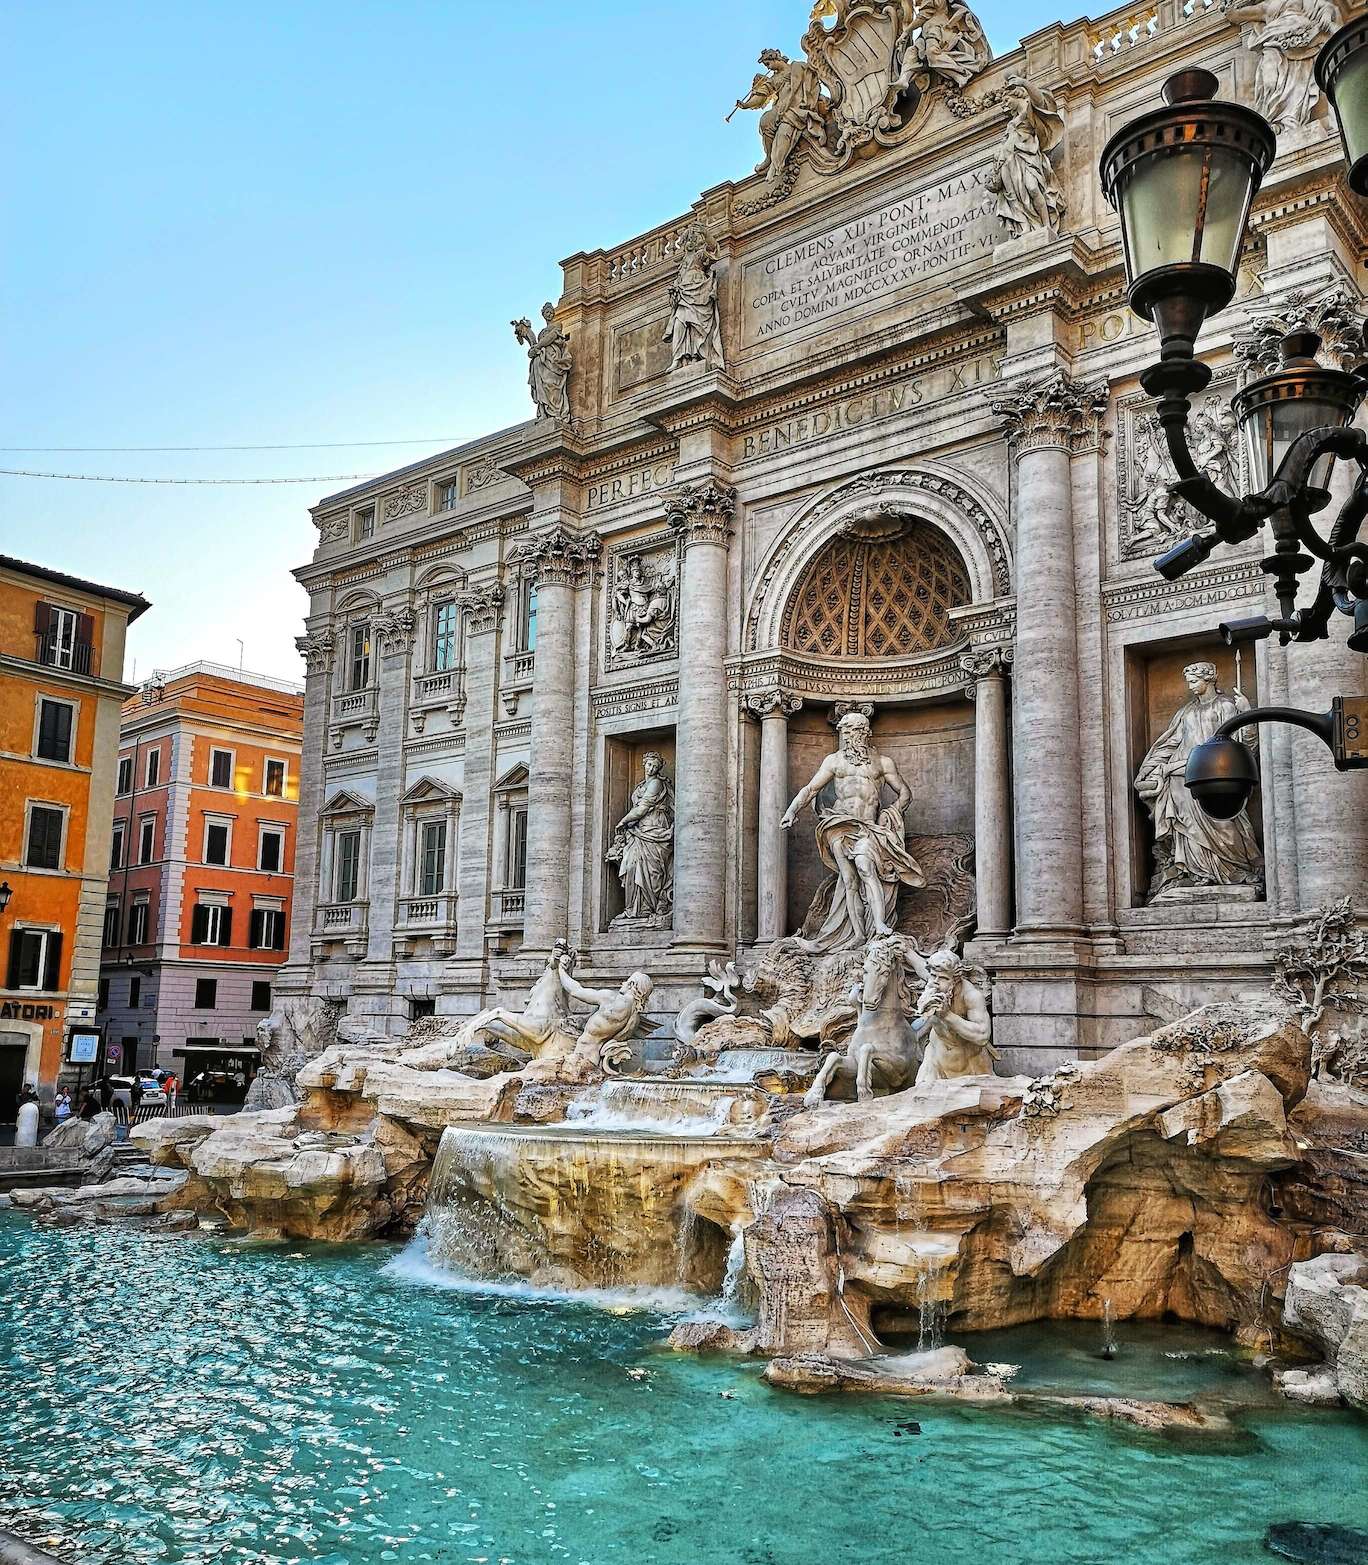 The Most Beautiful Fountains in Rome: 16 of our Favourite Fountains in